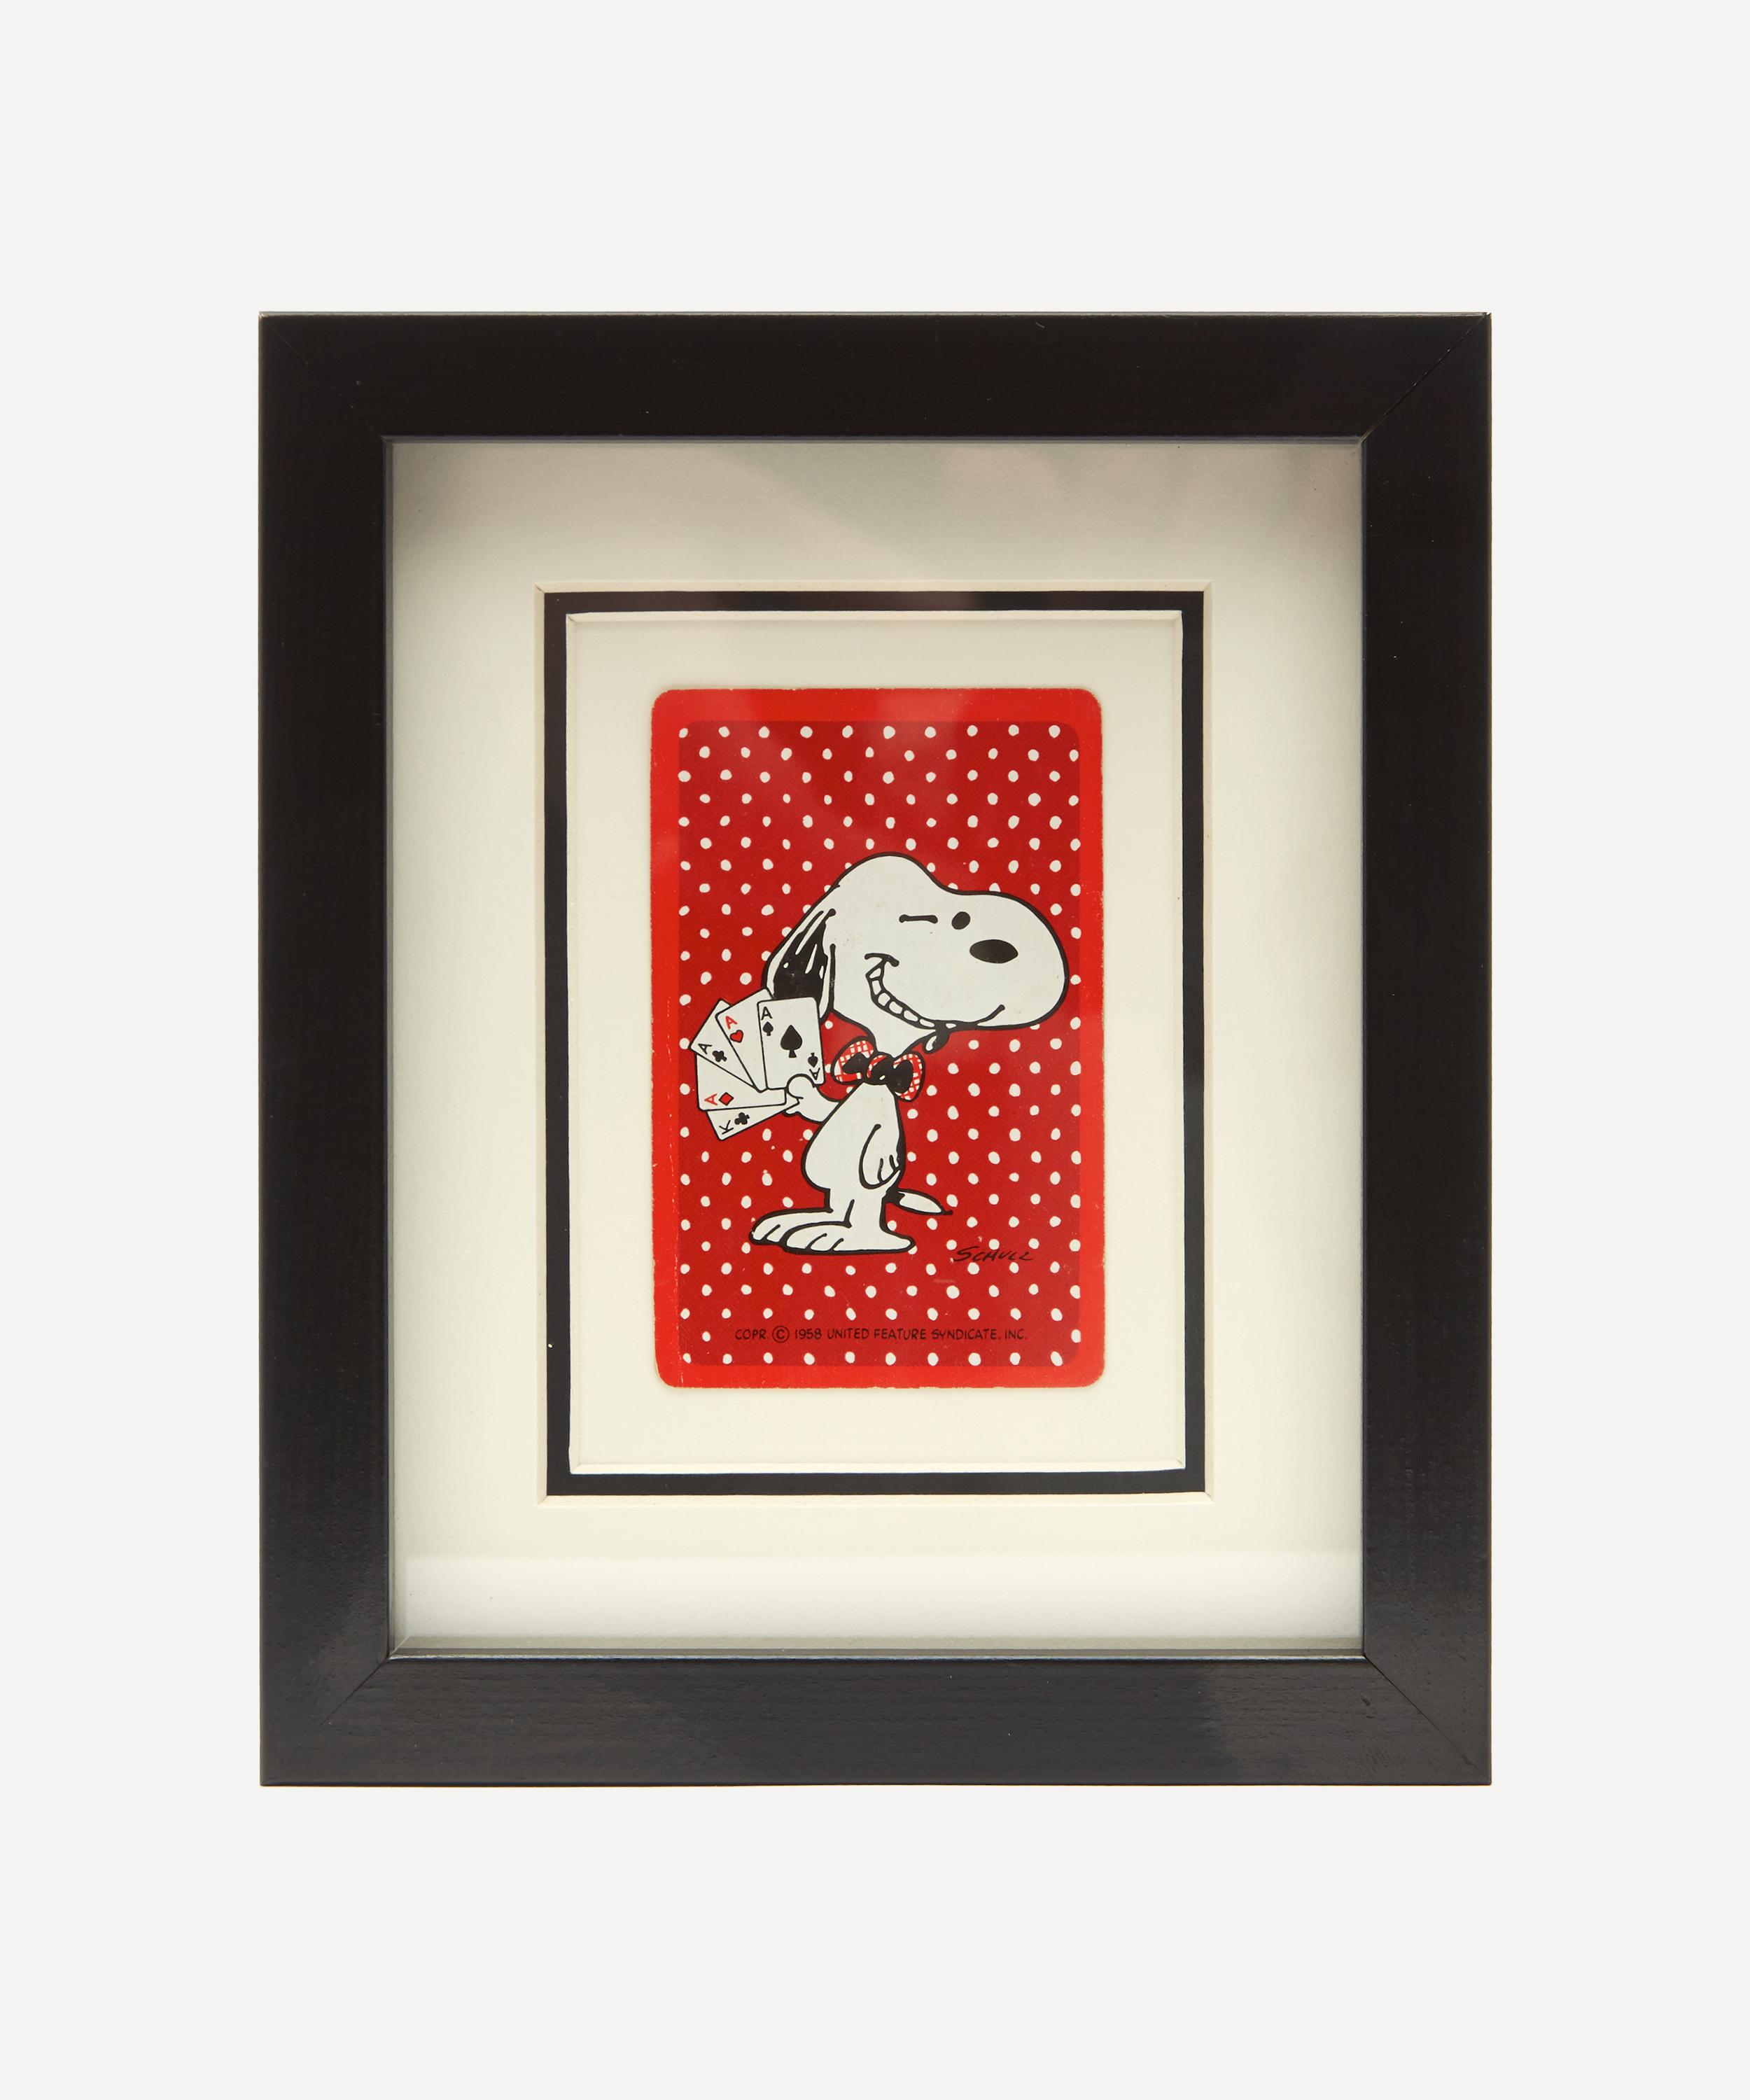 Snoopy Winking Vintage Framed Playing Card Liberty London